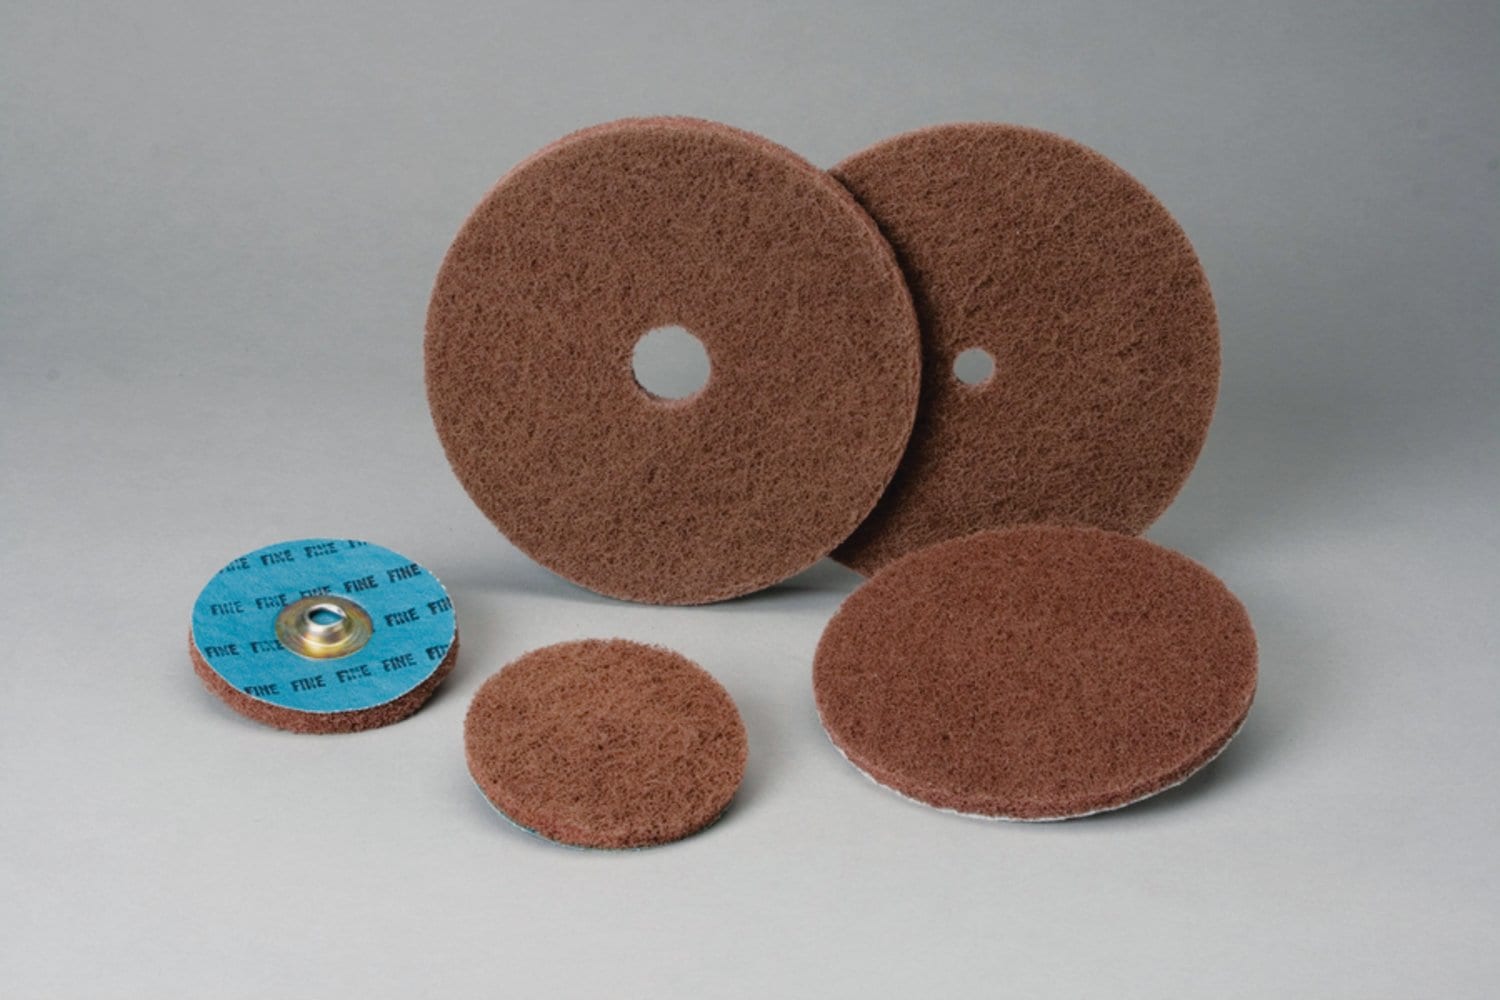 7010368927 - Private Label - Buff and Blend GP Disc, 8" 1/2"ID MED A/O BUFF-GP,
77182, 10/Bag, 100 ea/Case